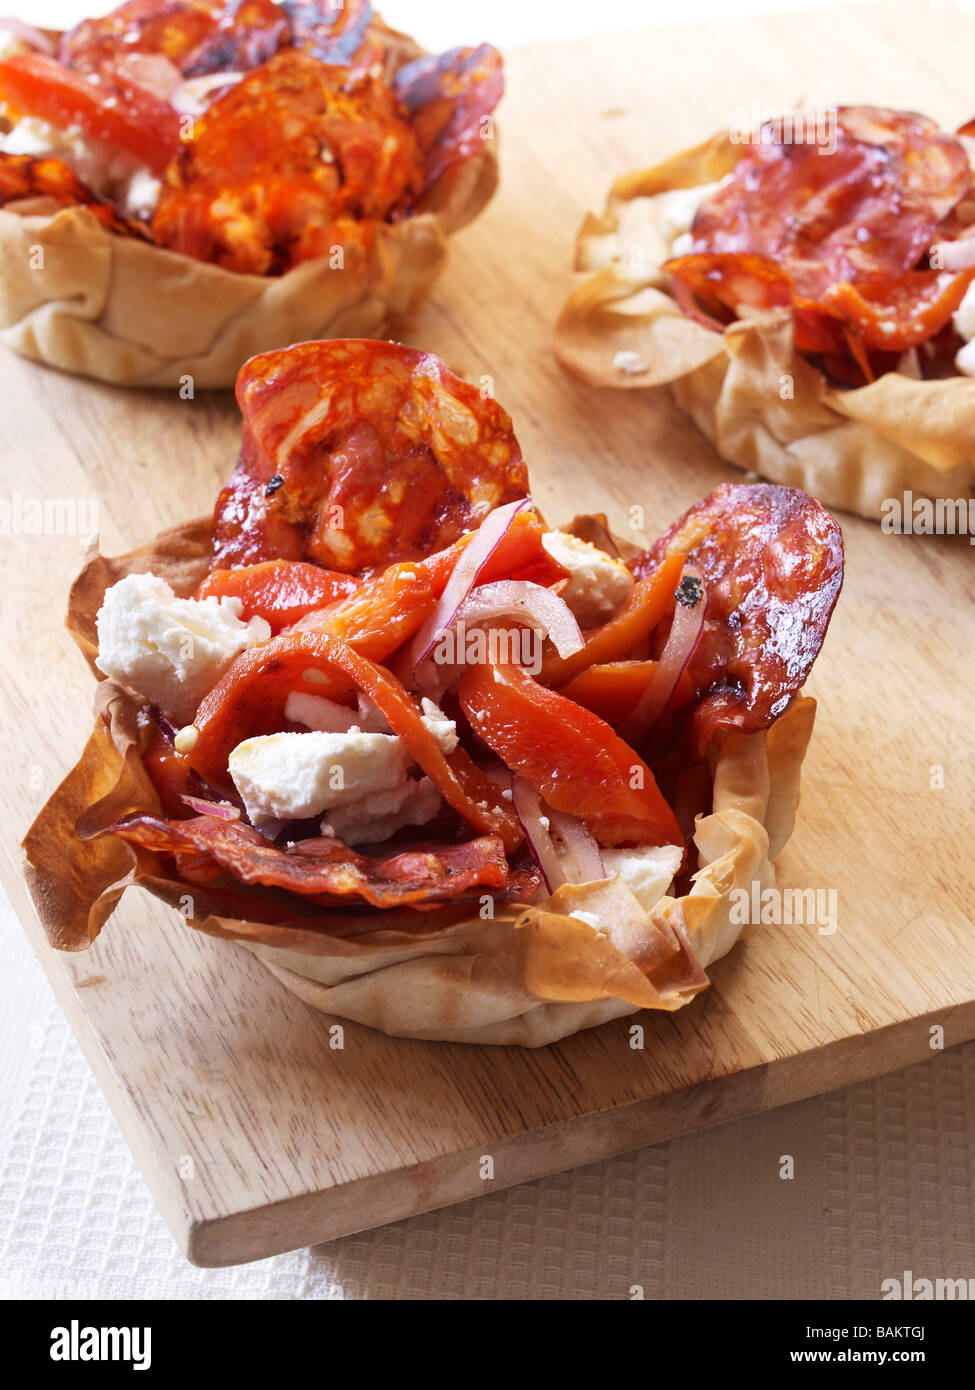 Filo pastry filled with Goats Cheese, Chorizo and Red Peppers Stock Photo